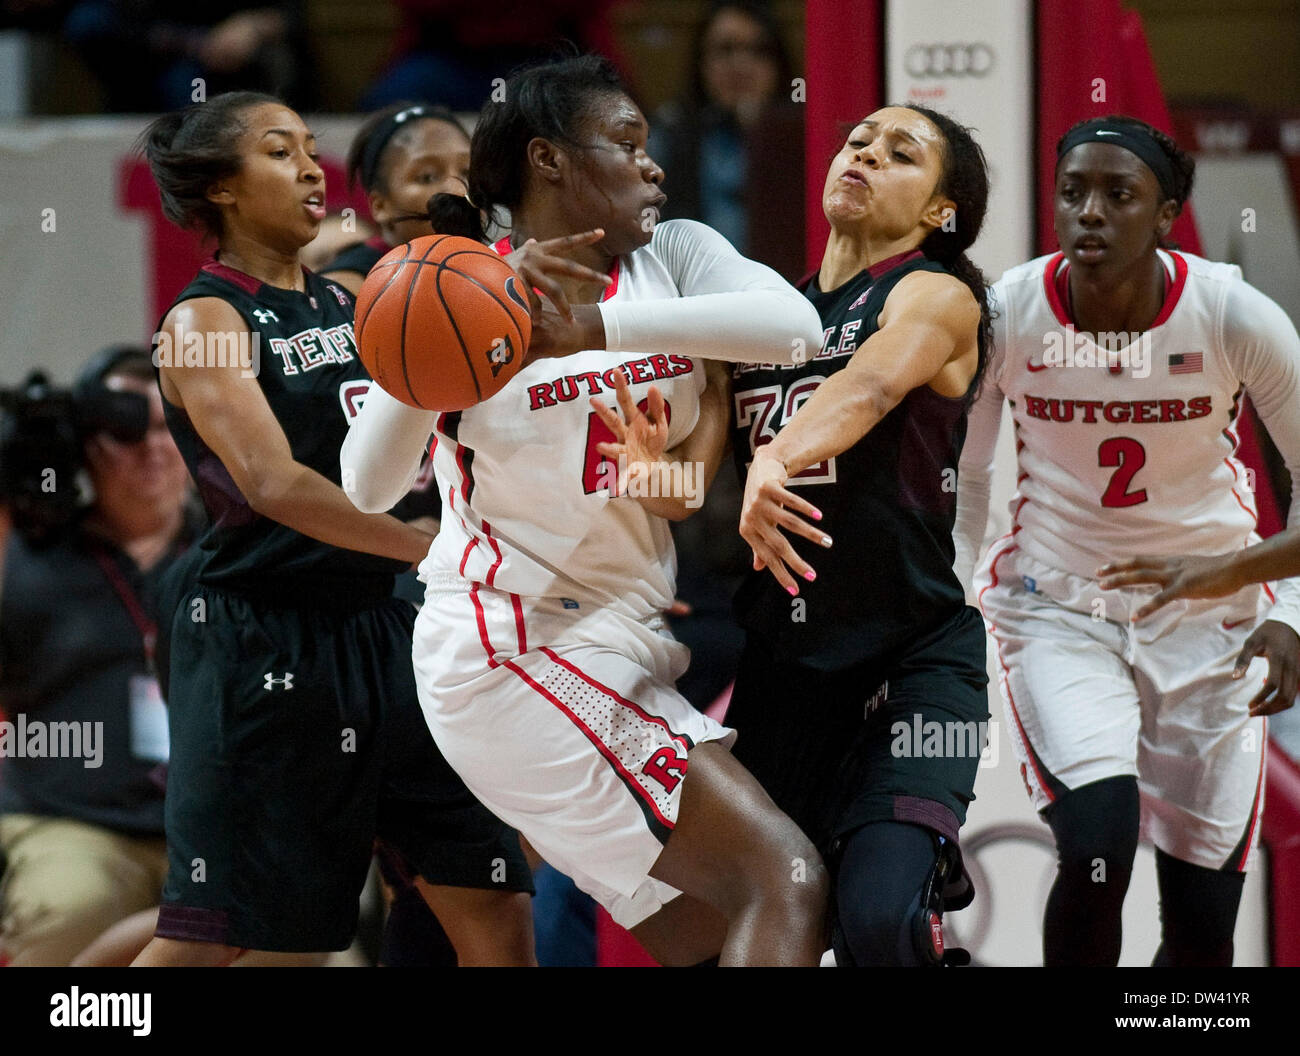 Piscataway, New Jersey, USA. 26th Feb, 2014. Rutgers' forward Ariel Butts (43) gets pressure on the ball by Temple's forward Natasha Thames (32) in the first half during American Athletic Conference action between the Rutgers Scarlet Knights and Temple Owls at the Louis Brown Athletic Center (The RAC) in Piscataway, New Jersey. © csm/Alamy Live News Stock Photo